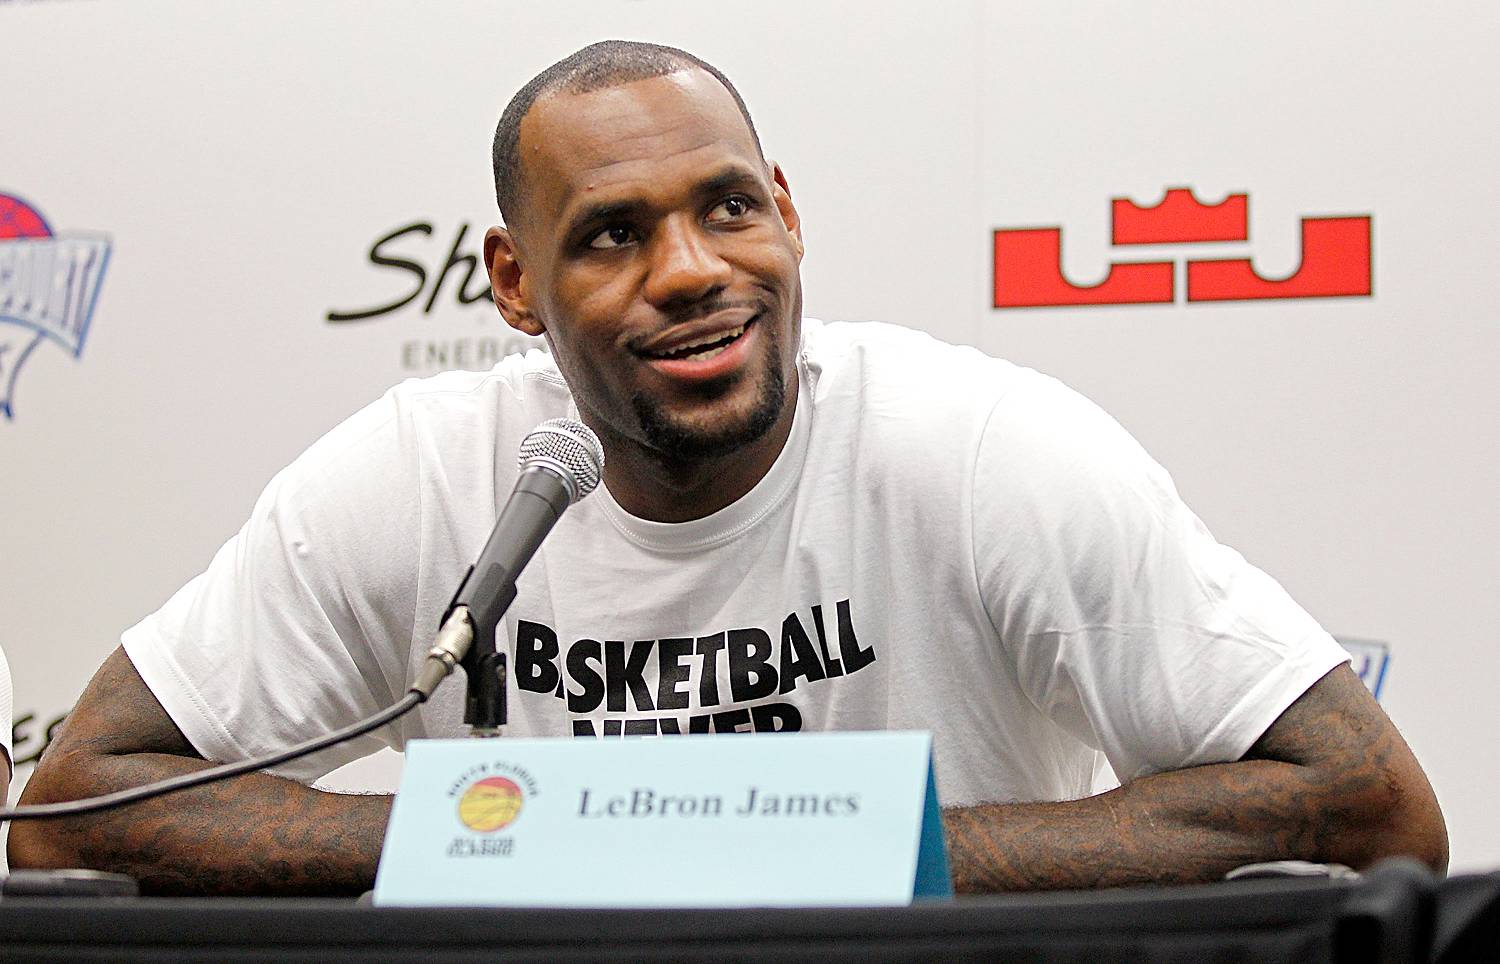 LeBron James - Like Obama, former Cleveland Cavalier James knows what it's like to feel the heat from a swing state. But the NBA star still has the support of the basketball-loving President, and Obama can count on a fat check from James during each election.&nbsp;(Photo: Mike Ehrmann/Getty Images)